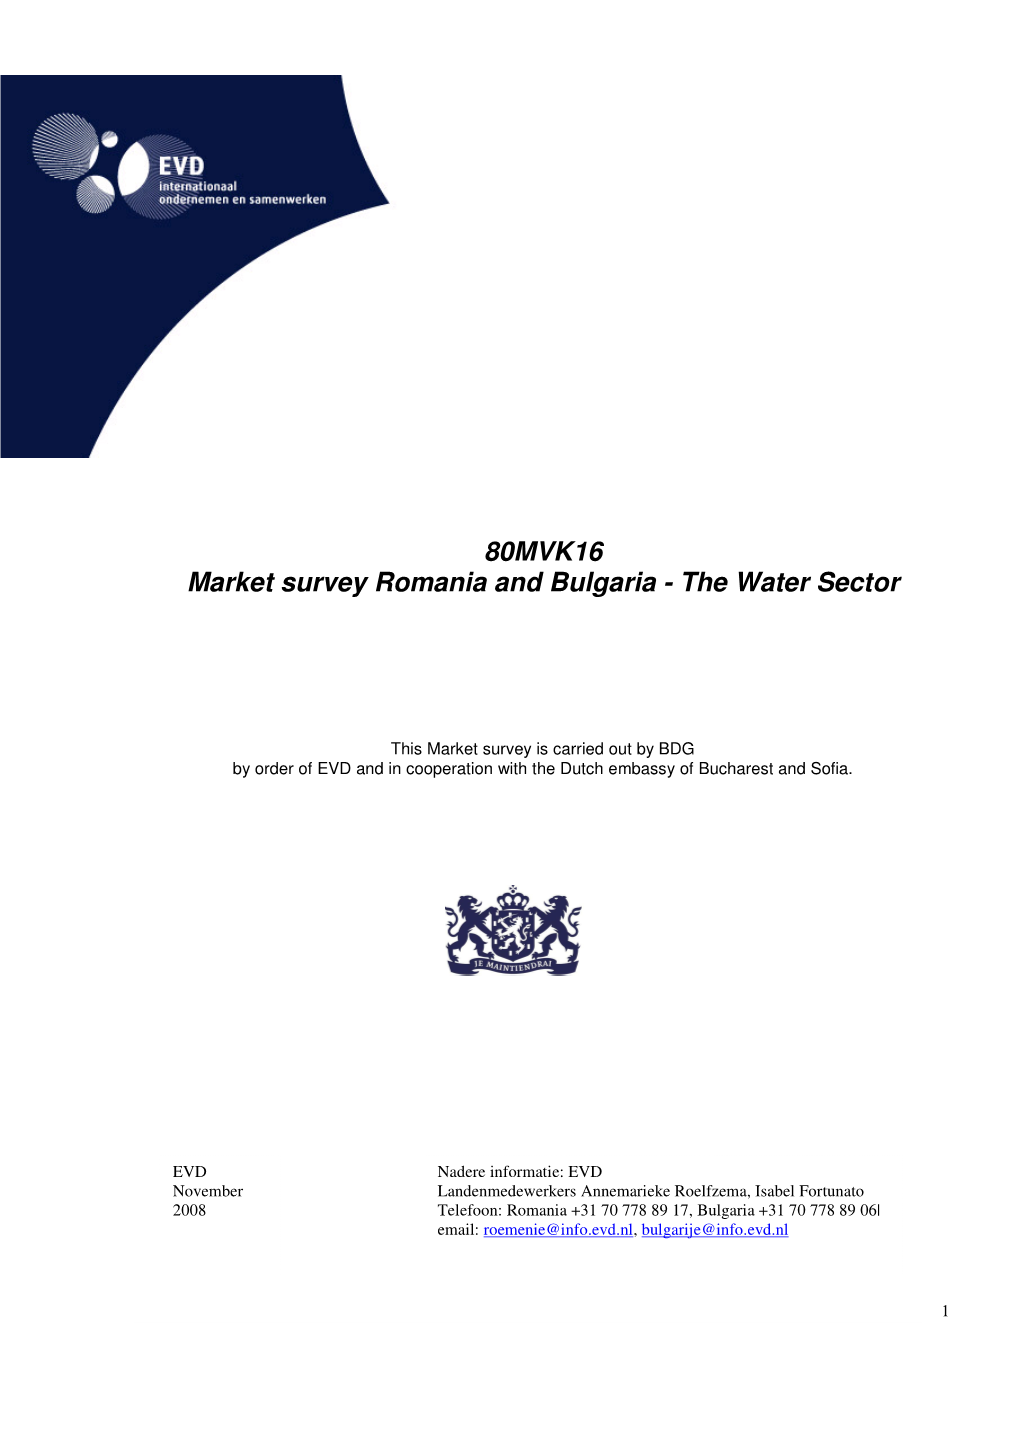 80MVK16 Market Survey Romania and Bulgaria - the Water Sector